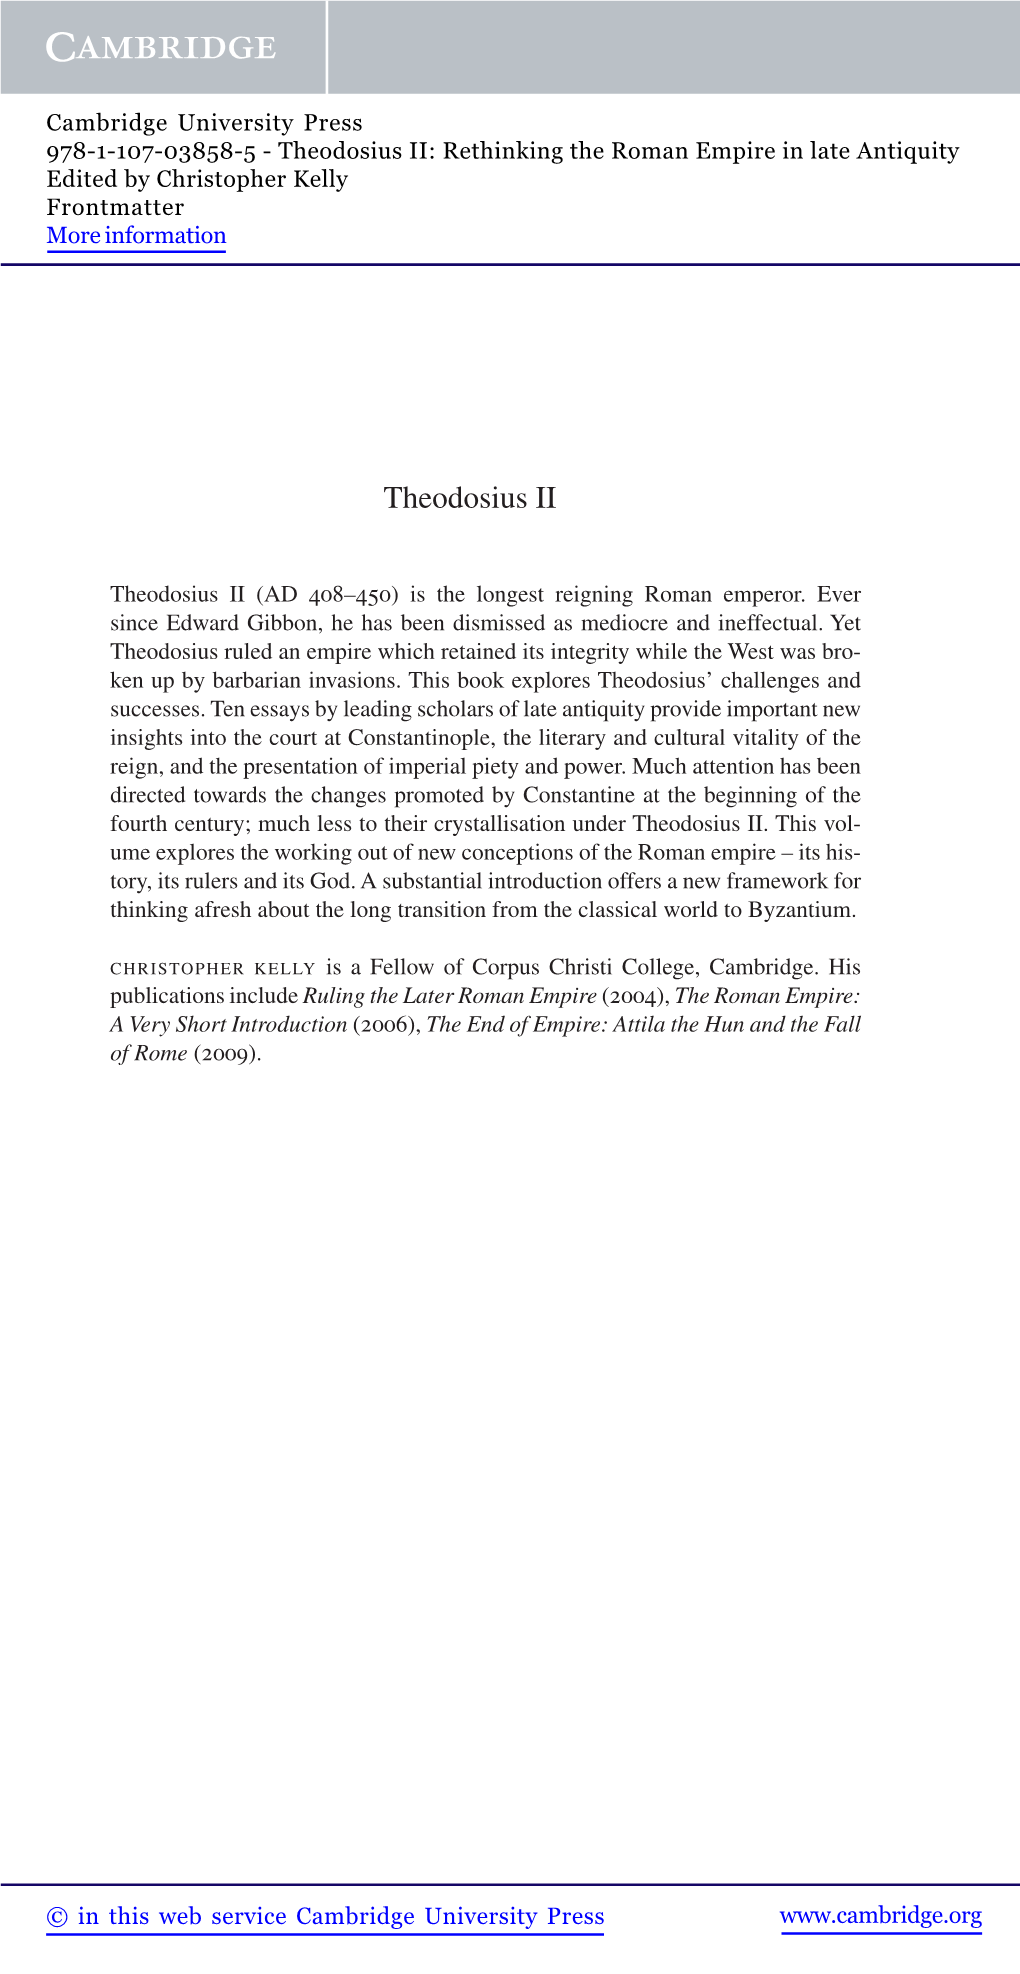 Theodosius II: Rethinking the Roman Empire in Late Antiquity Edited by Christopher Kelly Frontmatter More Information